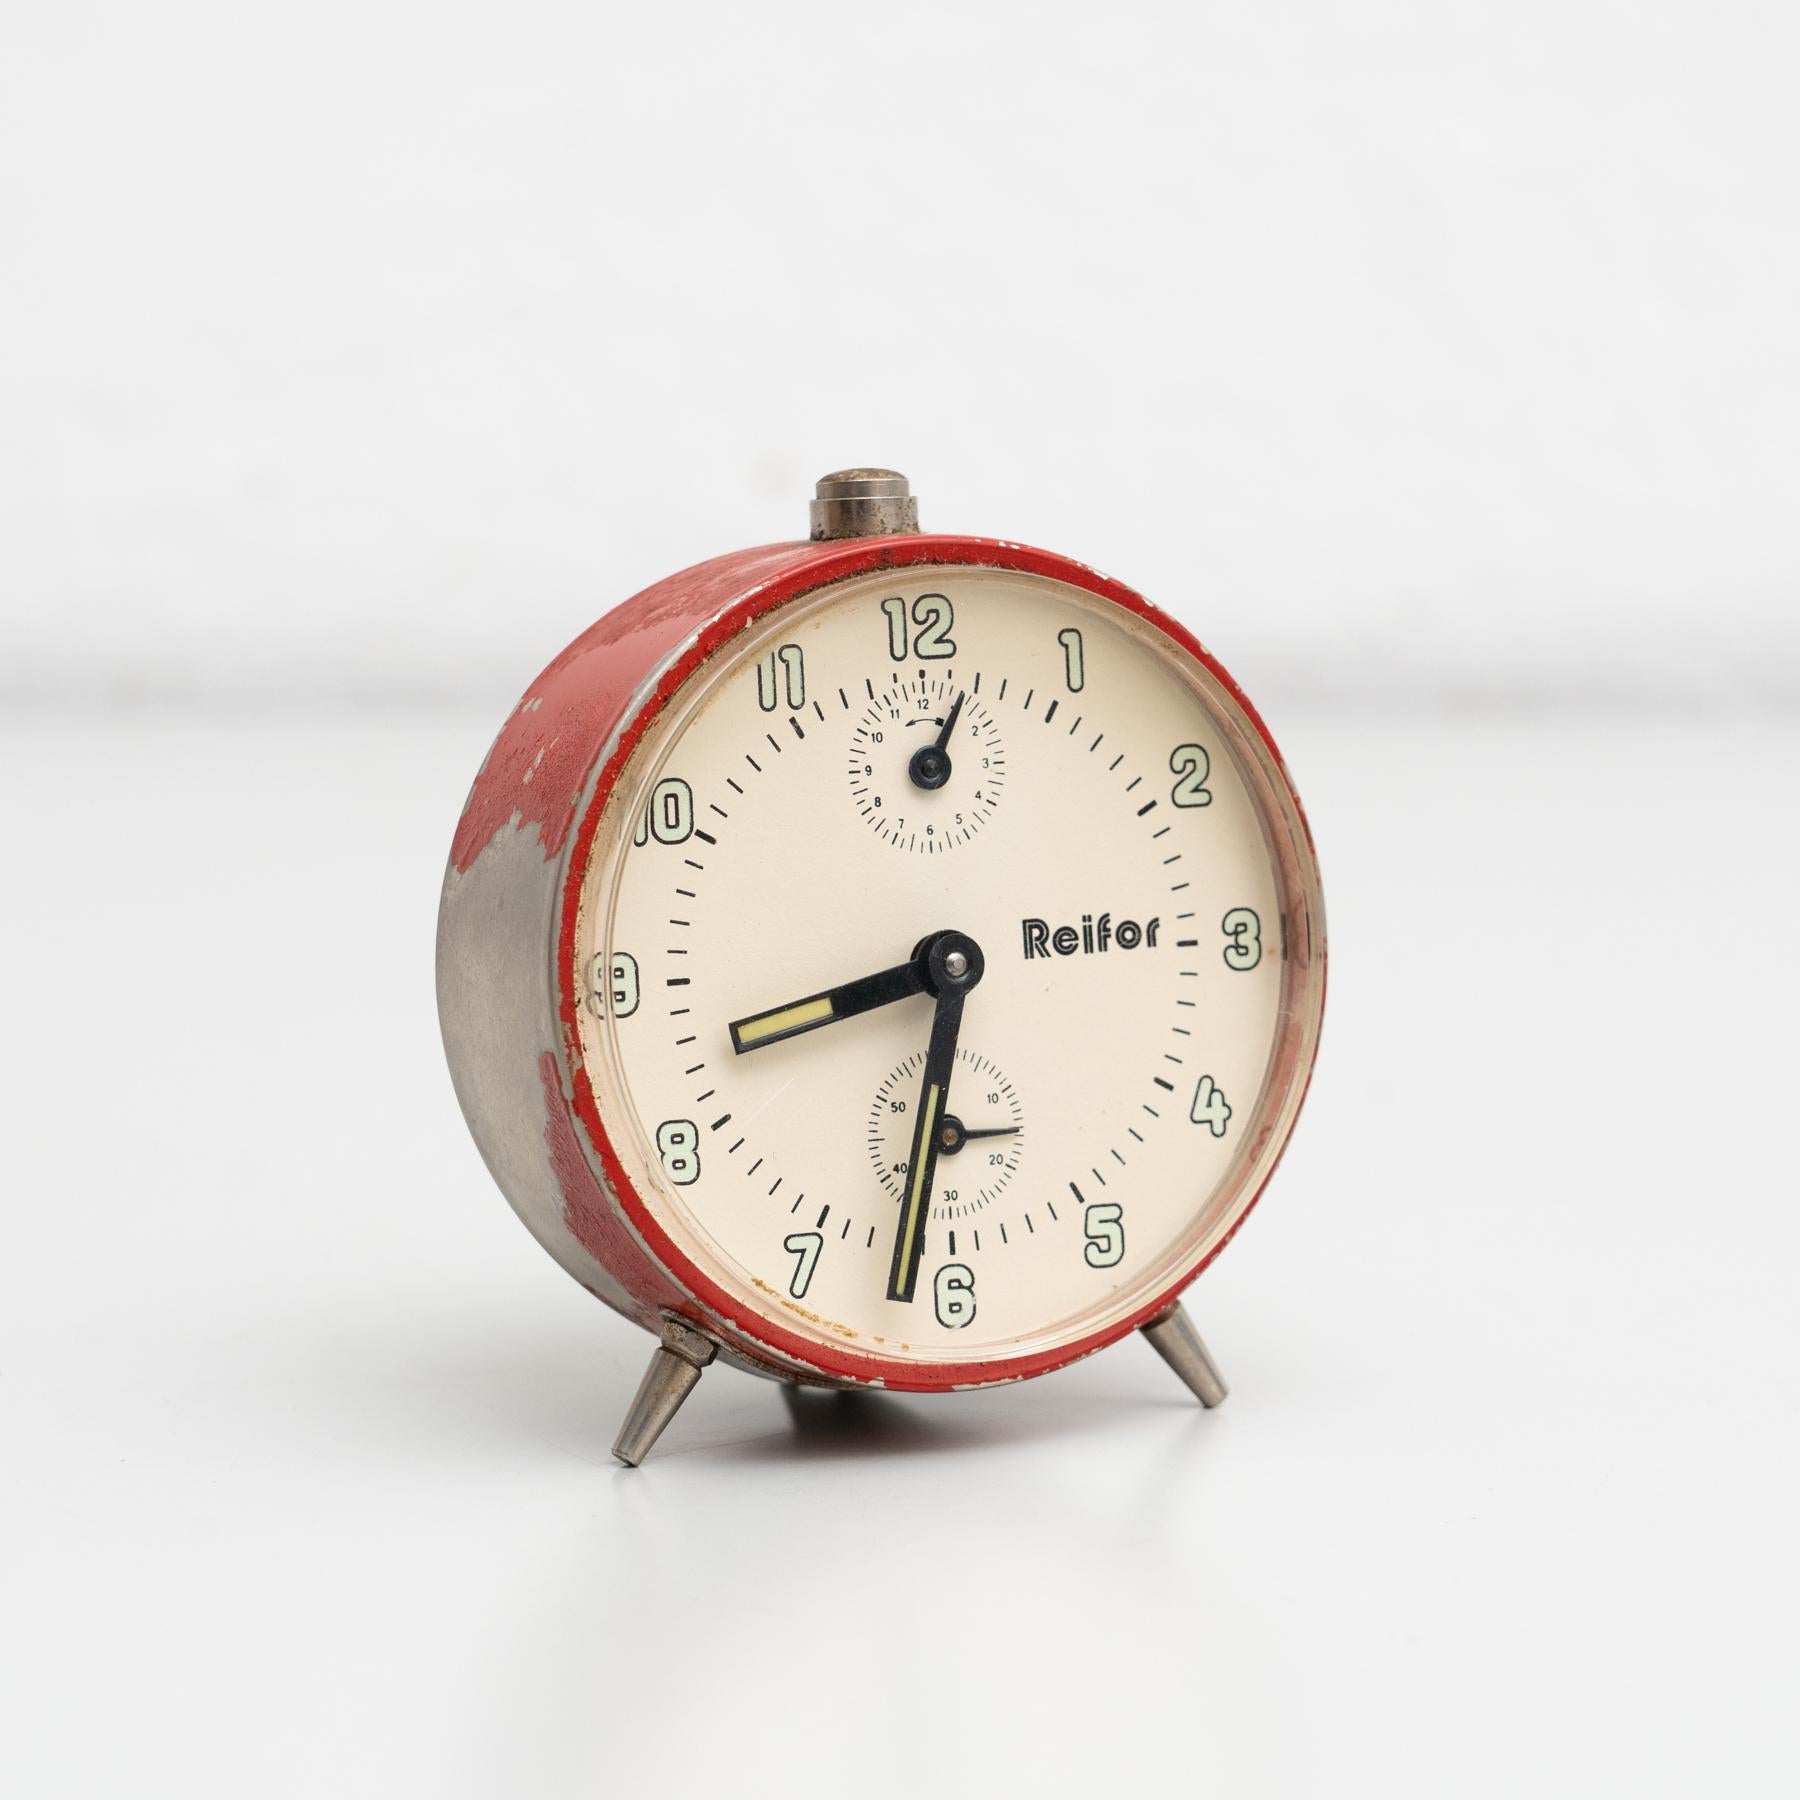 Vintage Spanish traditional alarm clock.

Manufactured by Reifor company in Spain circa 1960.

In original condition with minor wear consistent of age and use, preserving a beautiful patina.

Materials:
Metal.